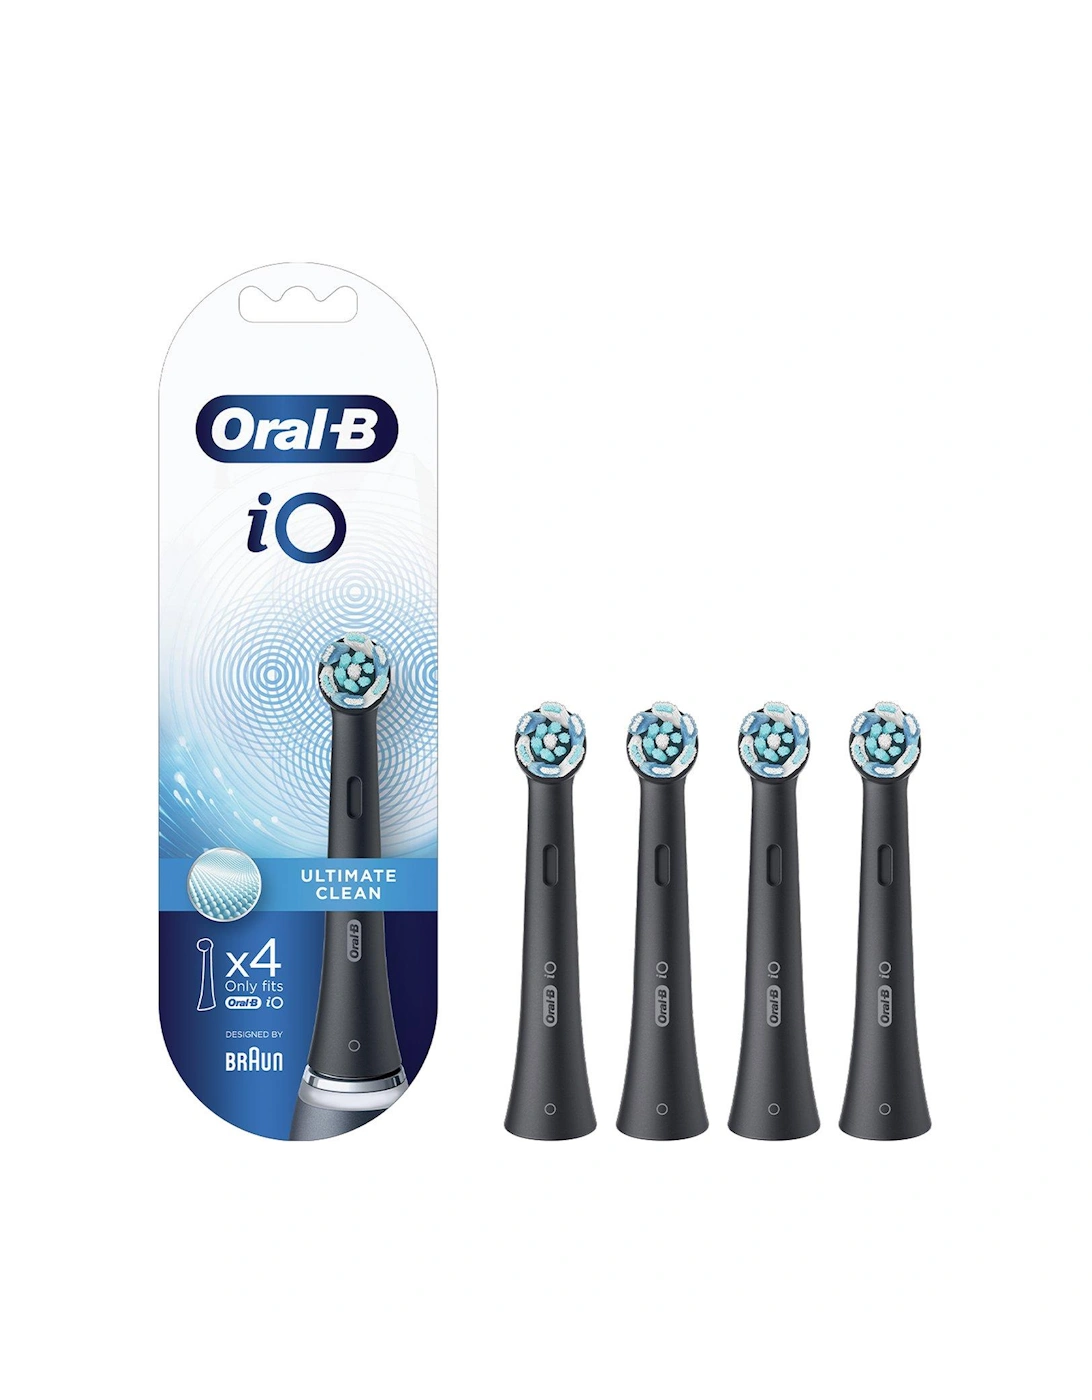 Oral-B iO Ultimate Clean Black Refill Heads - Pack of 4, 3 of 2